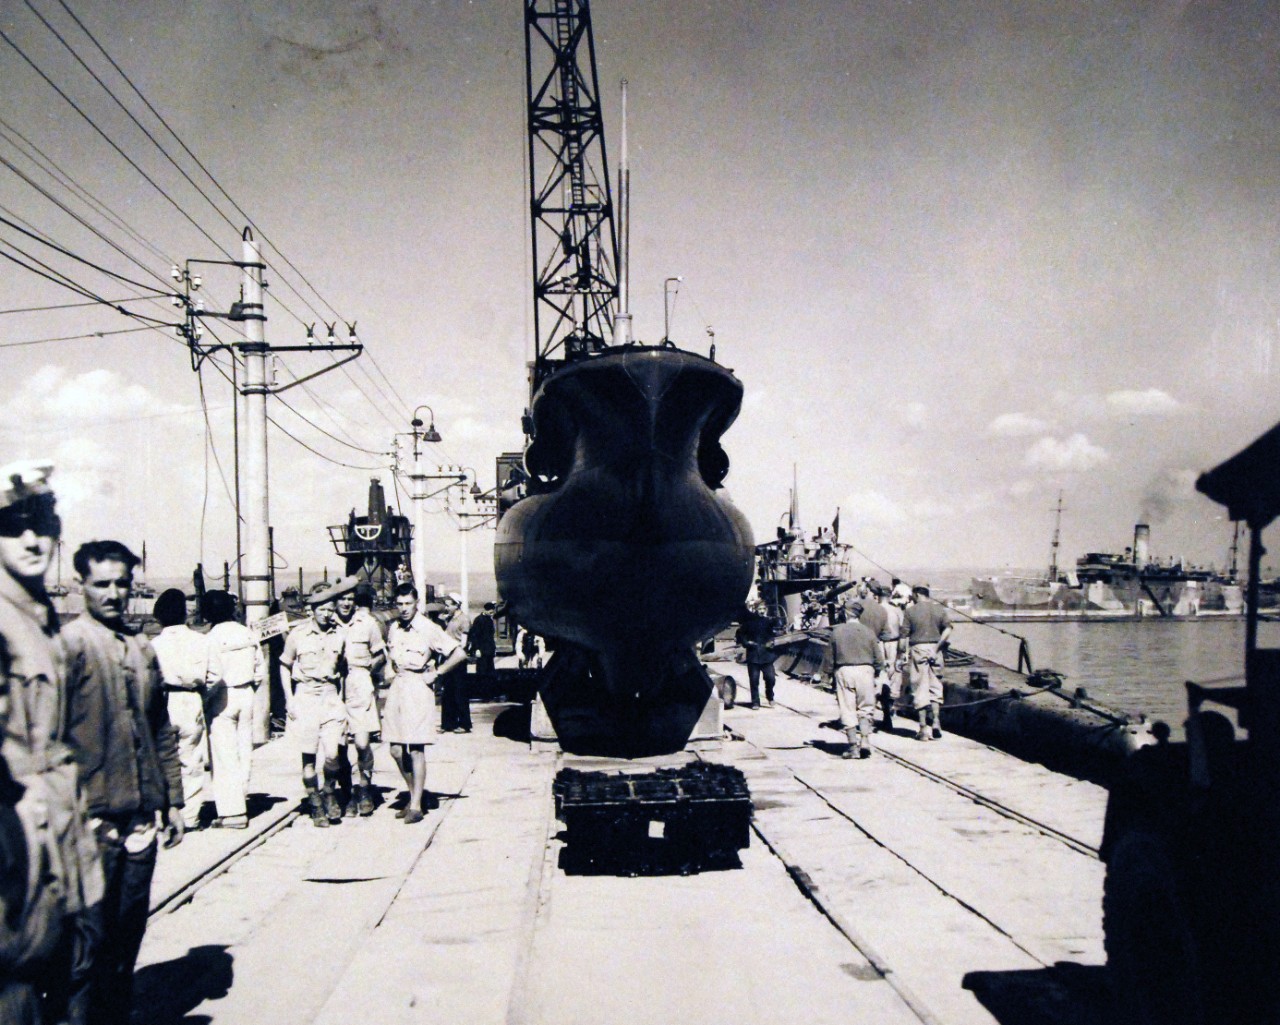 80-G-43773:  Italian CB Midget Submarine.    Italian warships surrendered at Taranto, Italy.  Bow on view of an Italian CB midget submarine, showing the turnip like bulge in their underwater construction.  Photograph released November 17, 1943.  Official U.S. Navy Photograph, now in the collections of the National Archives.   (2015/10/13).